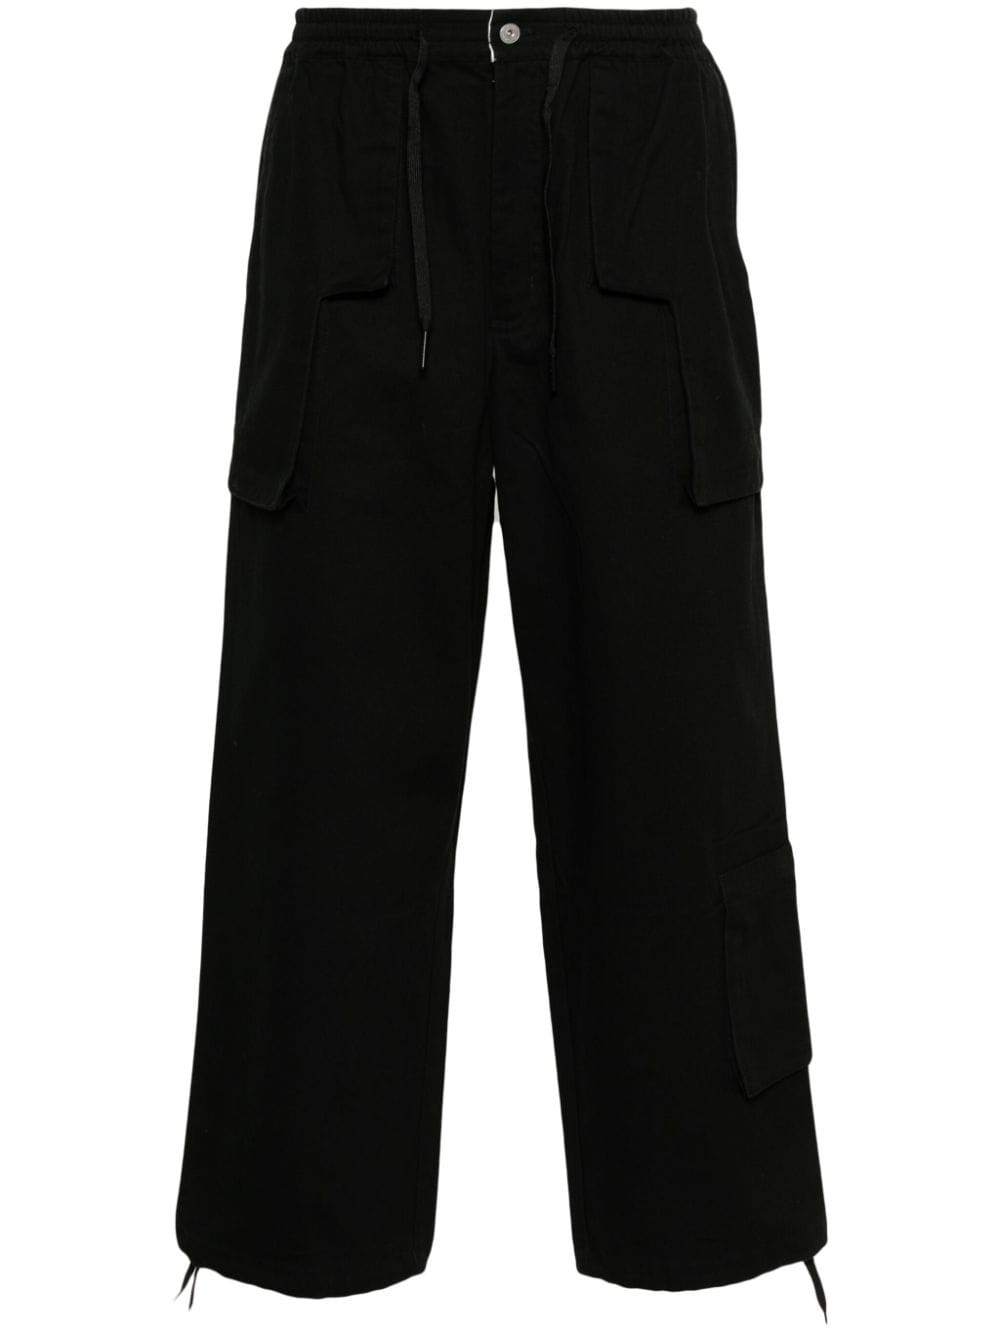 Image 1 of Perks And Mini P. World Return mid-waist loose-fit trousers